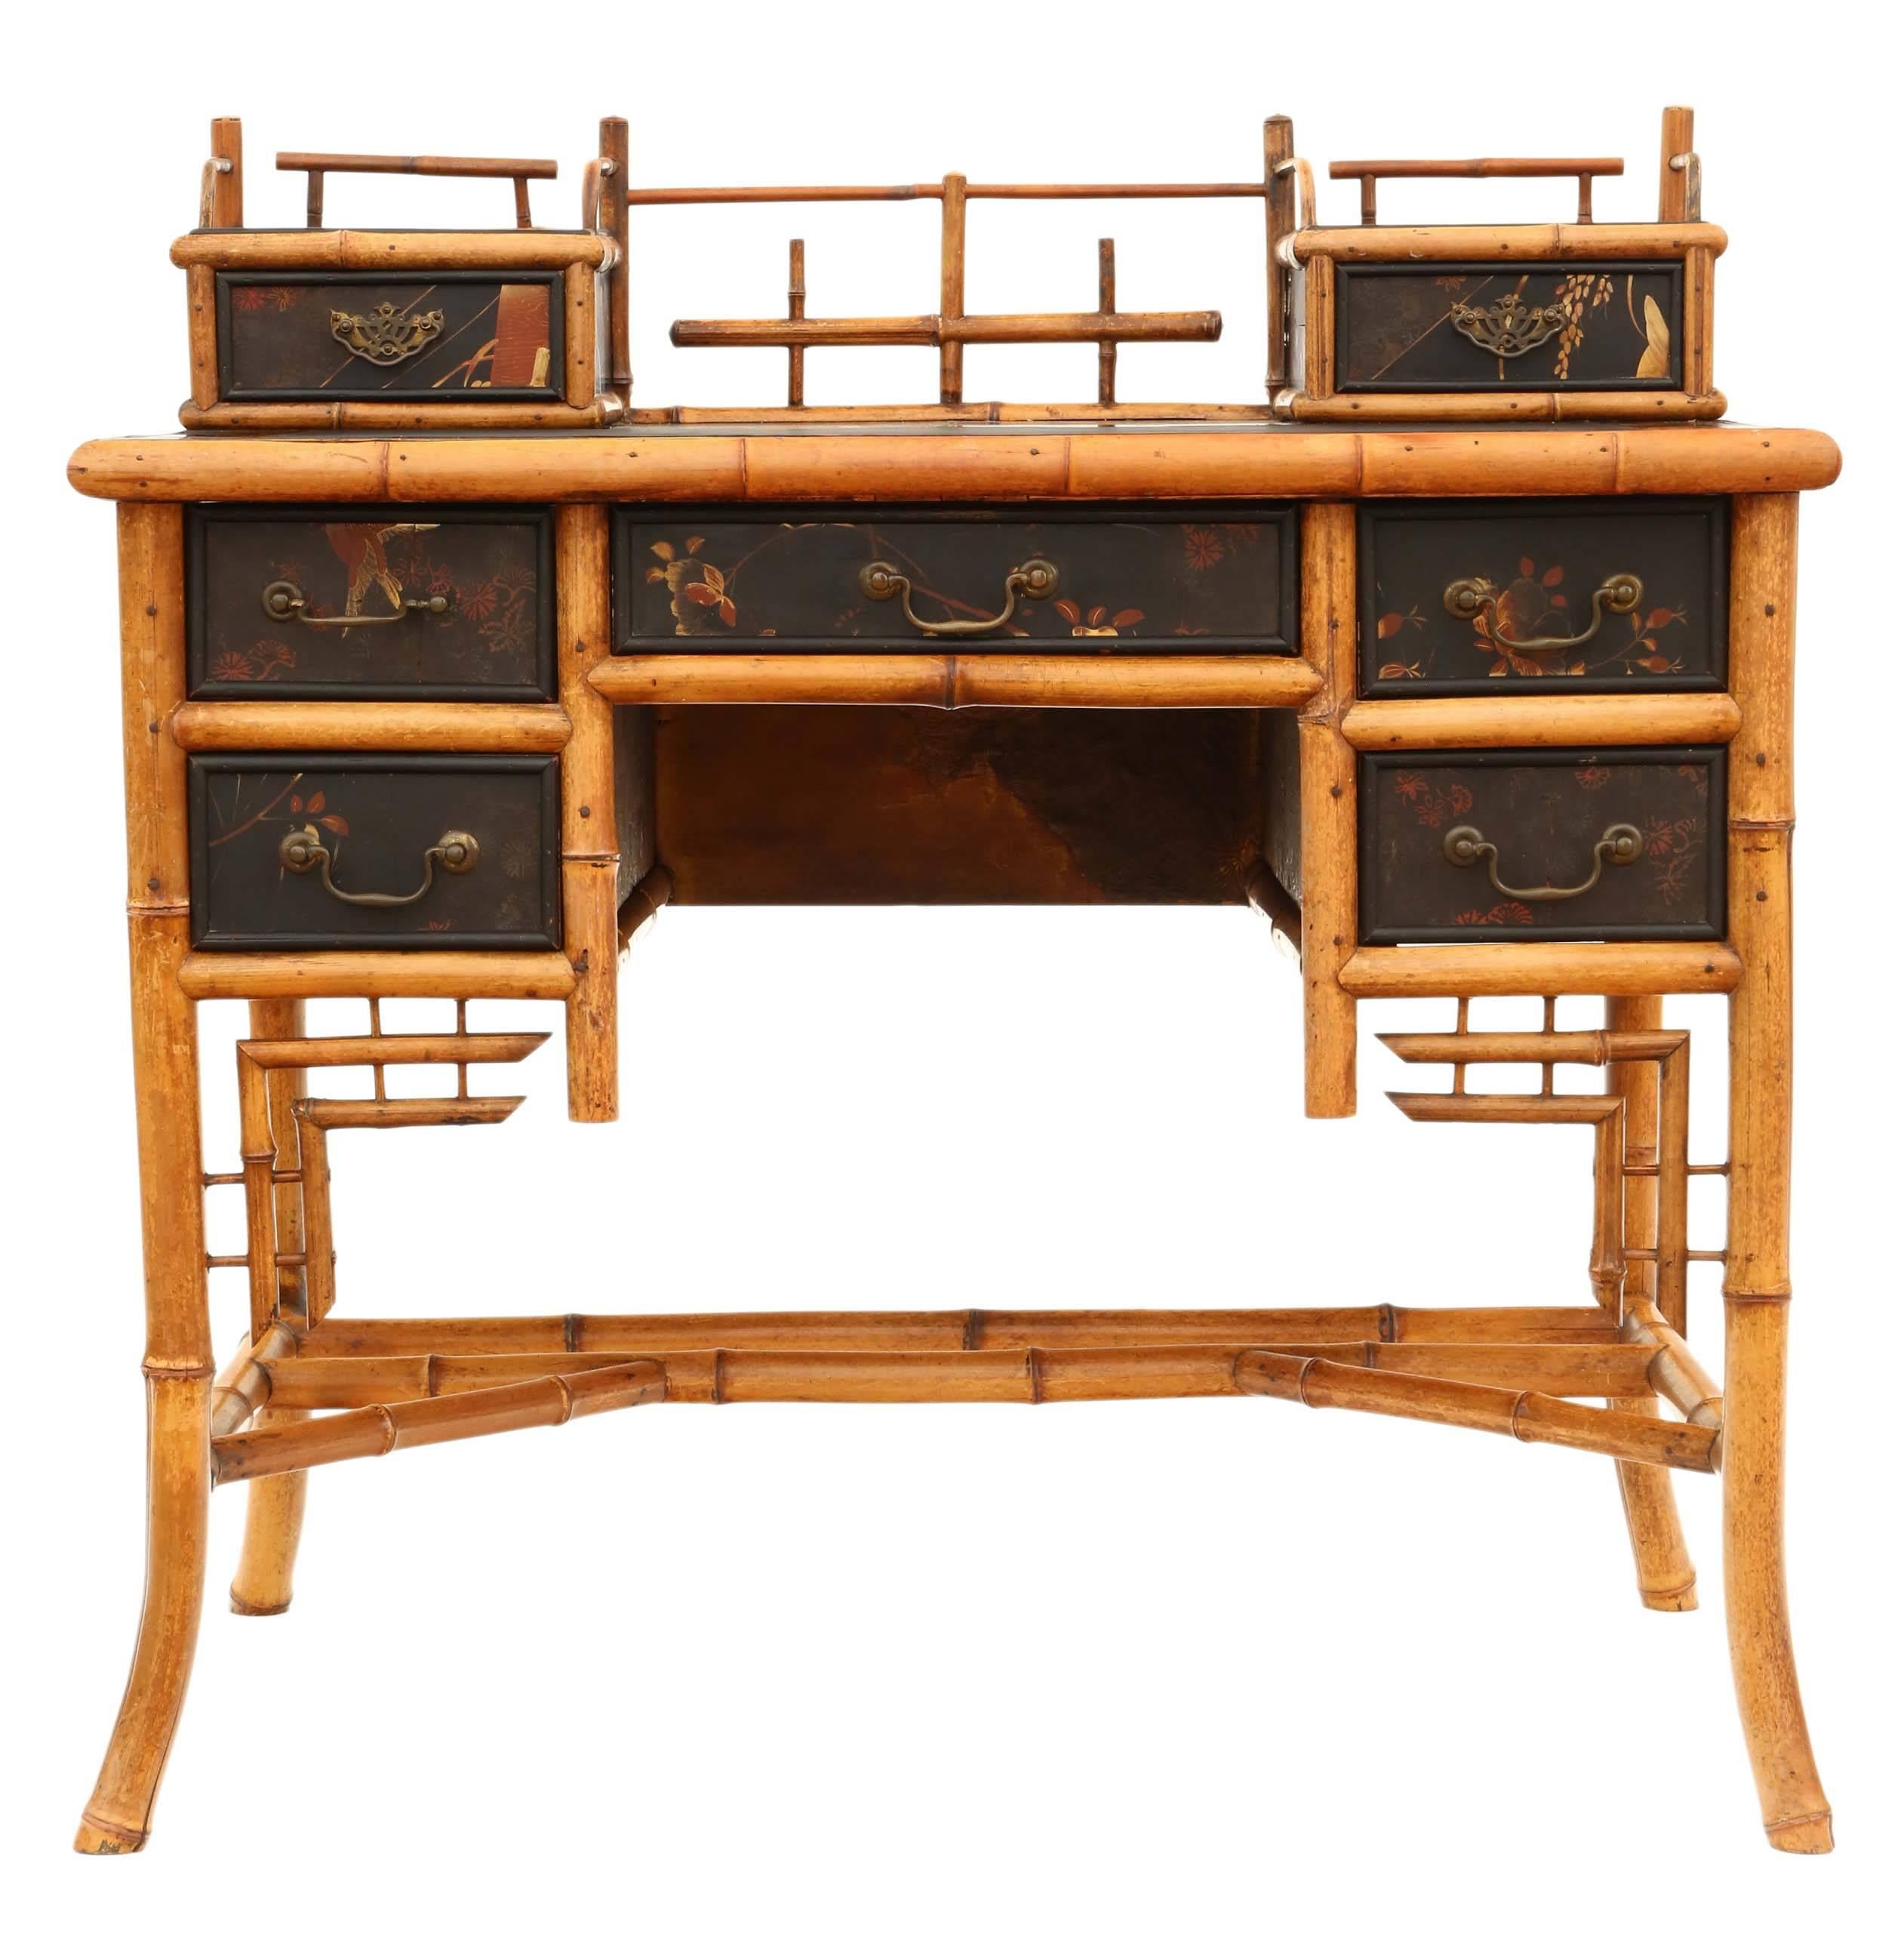 Antique quality late Victorian, circa 1900 chinoiserie bamboo desk, dressing or writing table. Lovely style.

No loose joints. Full of age, character and charm. No woodworm. The mahogany lined drawers slide freely. Replacement black leather